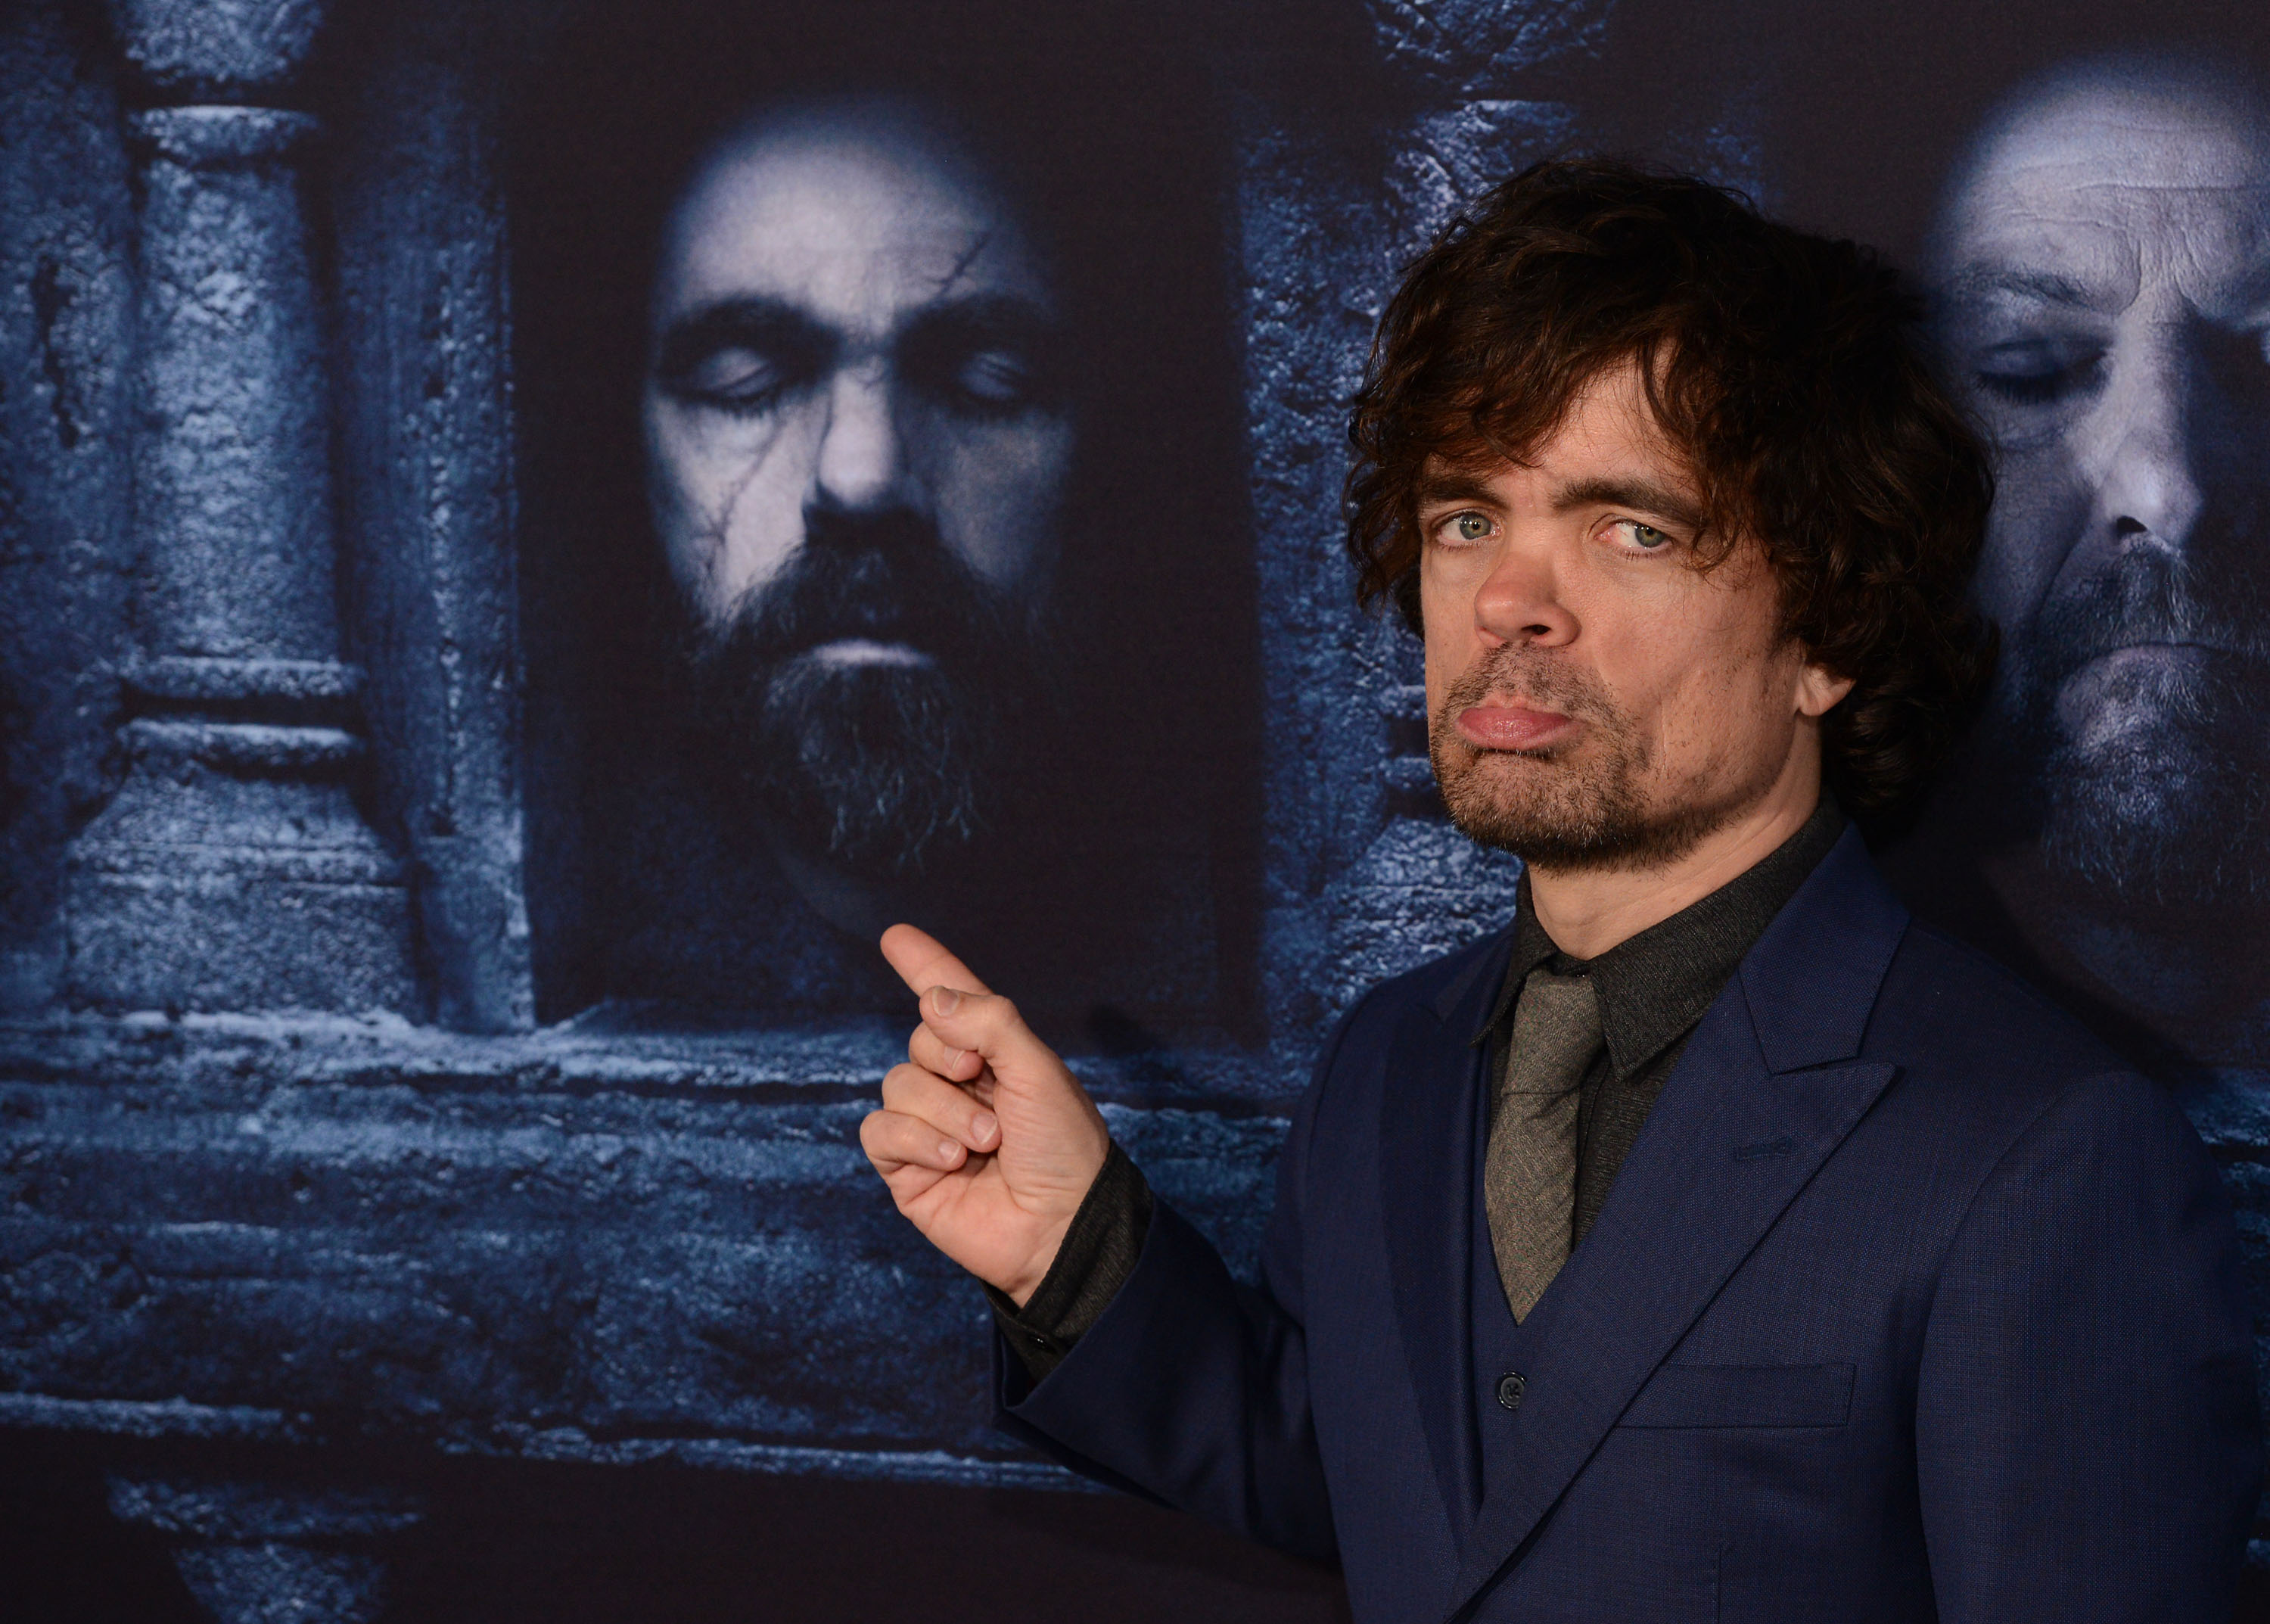 Actor Peter Dinklage arrives at the premiere of HBO's 'Game Of Thrones' Season 6 at TCL Chinese Theatre on April 10, 2016 in Hollywood, California.